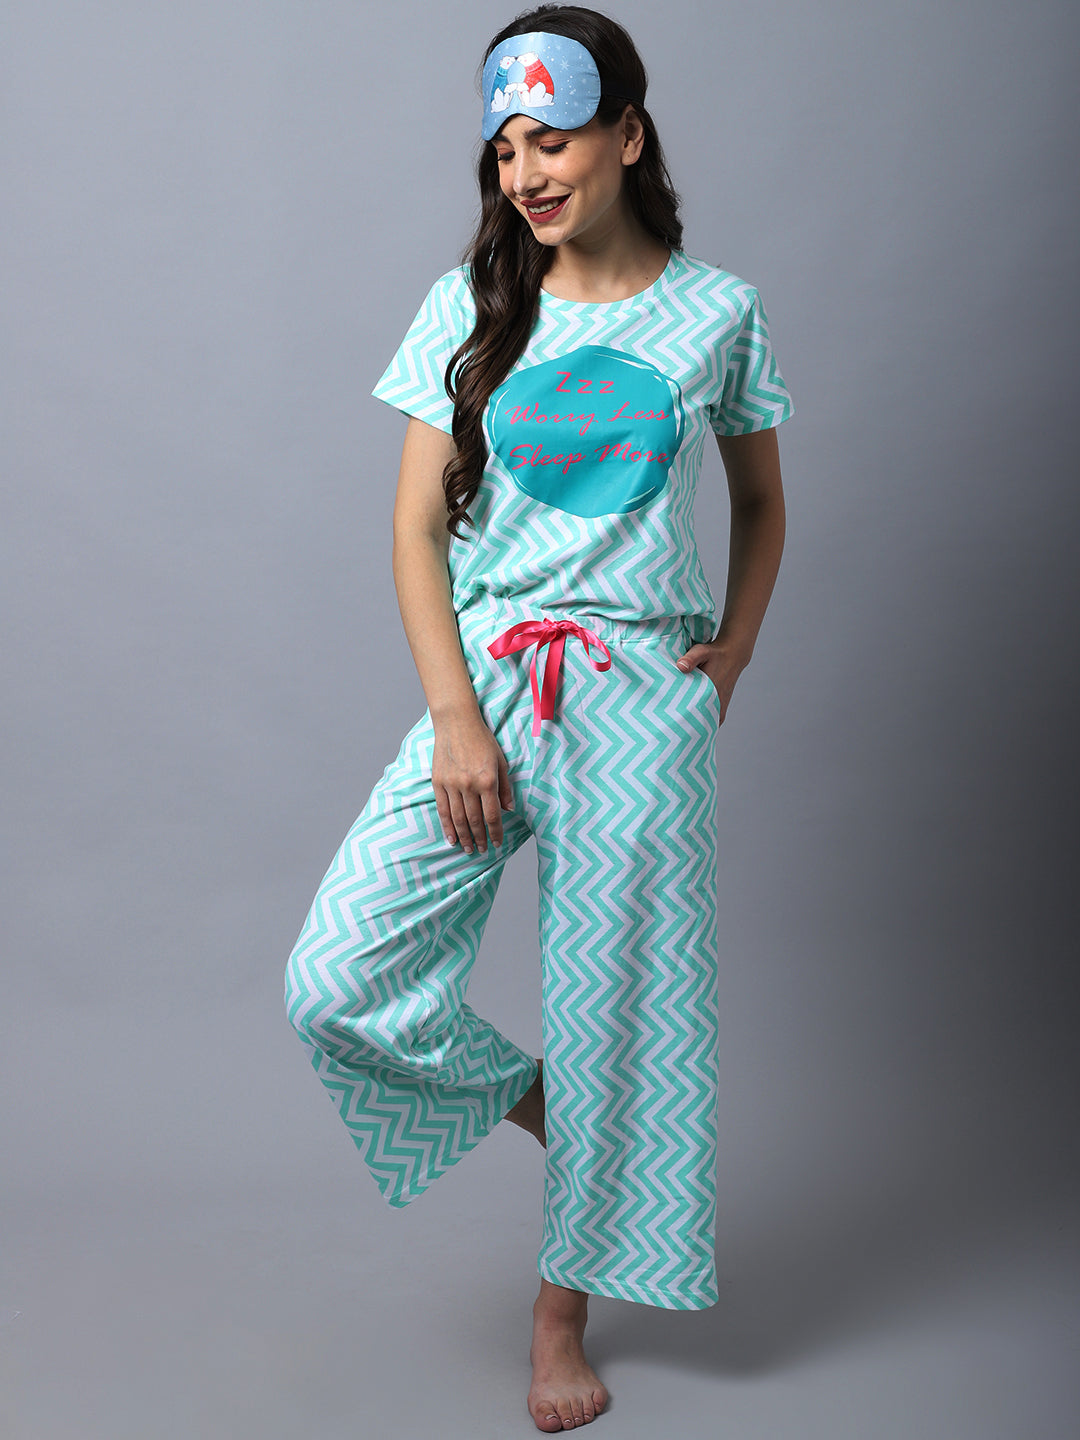 Worry Less Chevron Printed Lounge Set in Icy Green - 100% Cotton